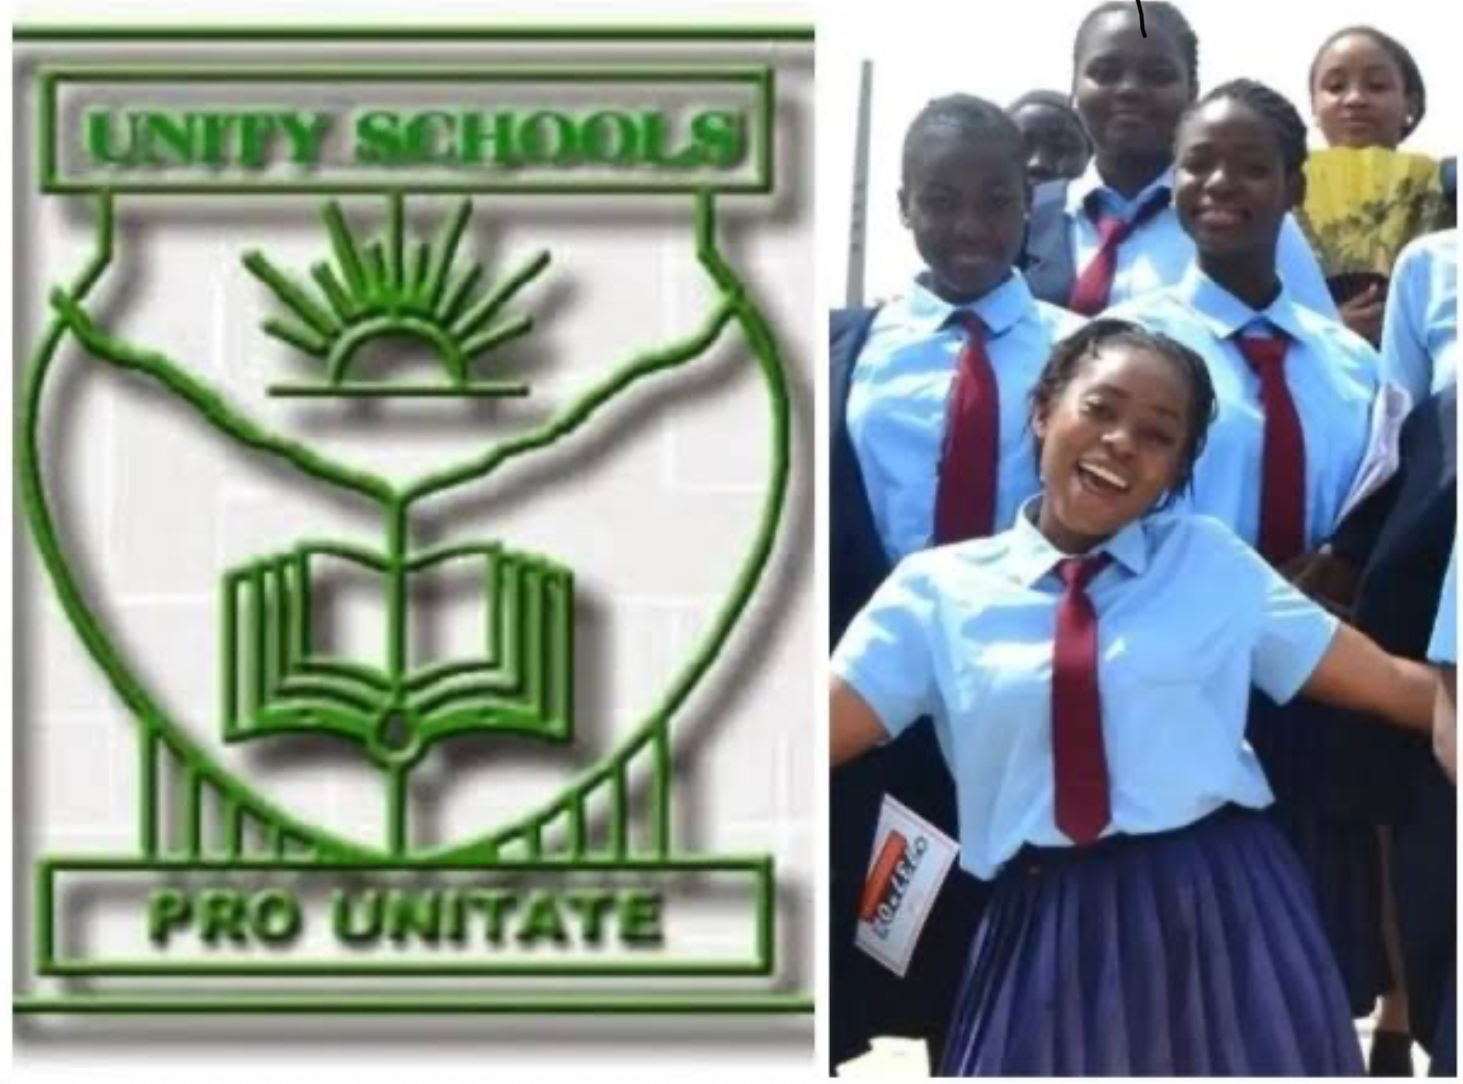 FG Reaffirms Commitment To Fund Unity Schools